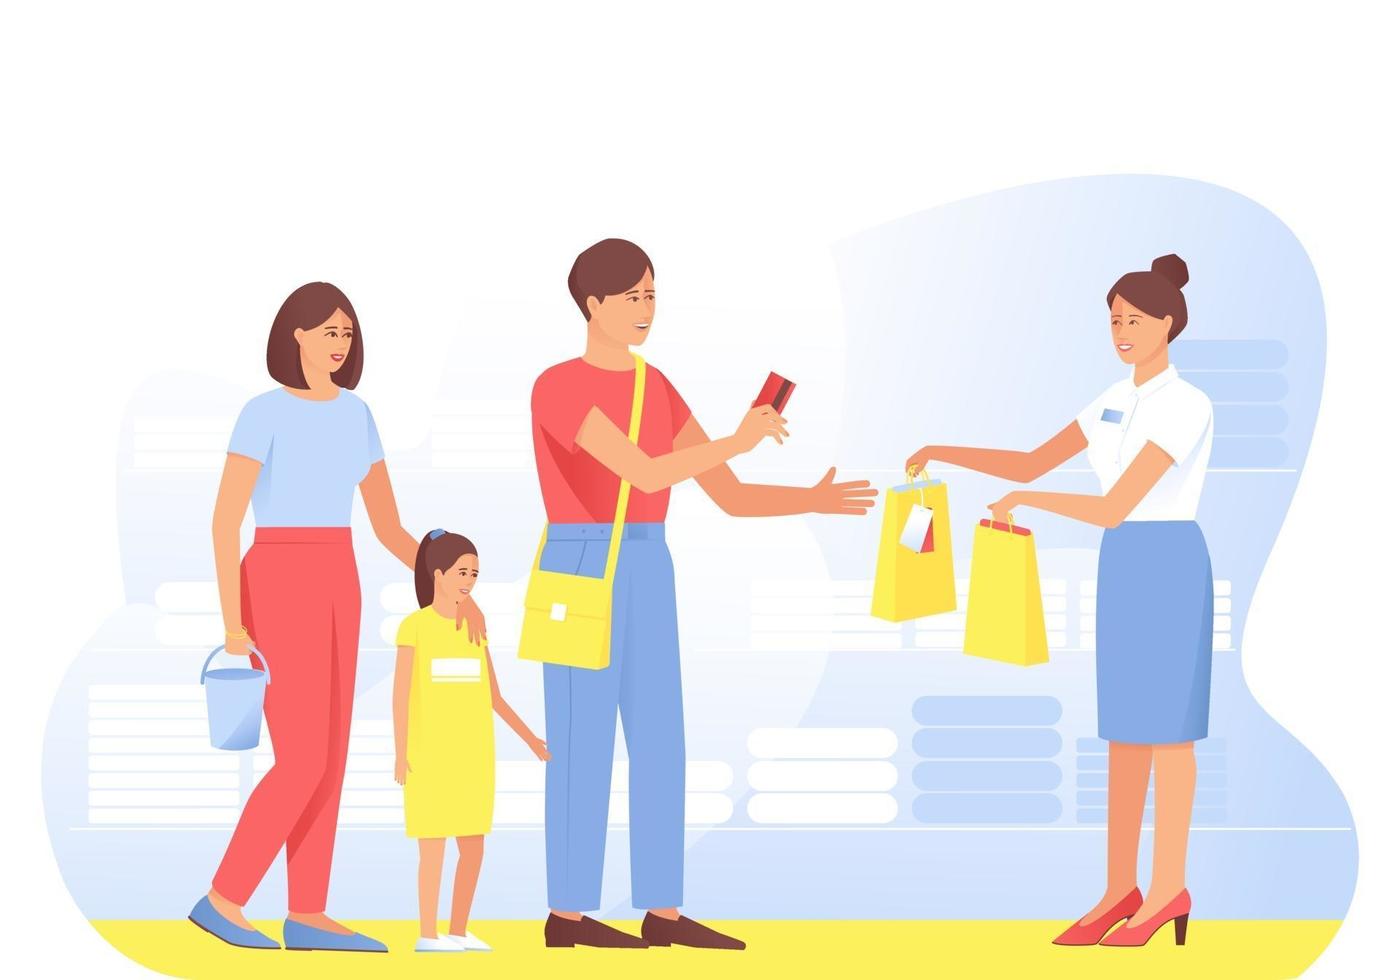 The family makes purchases from the seller in the store vector